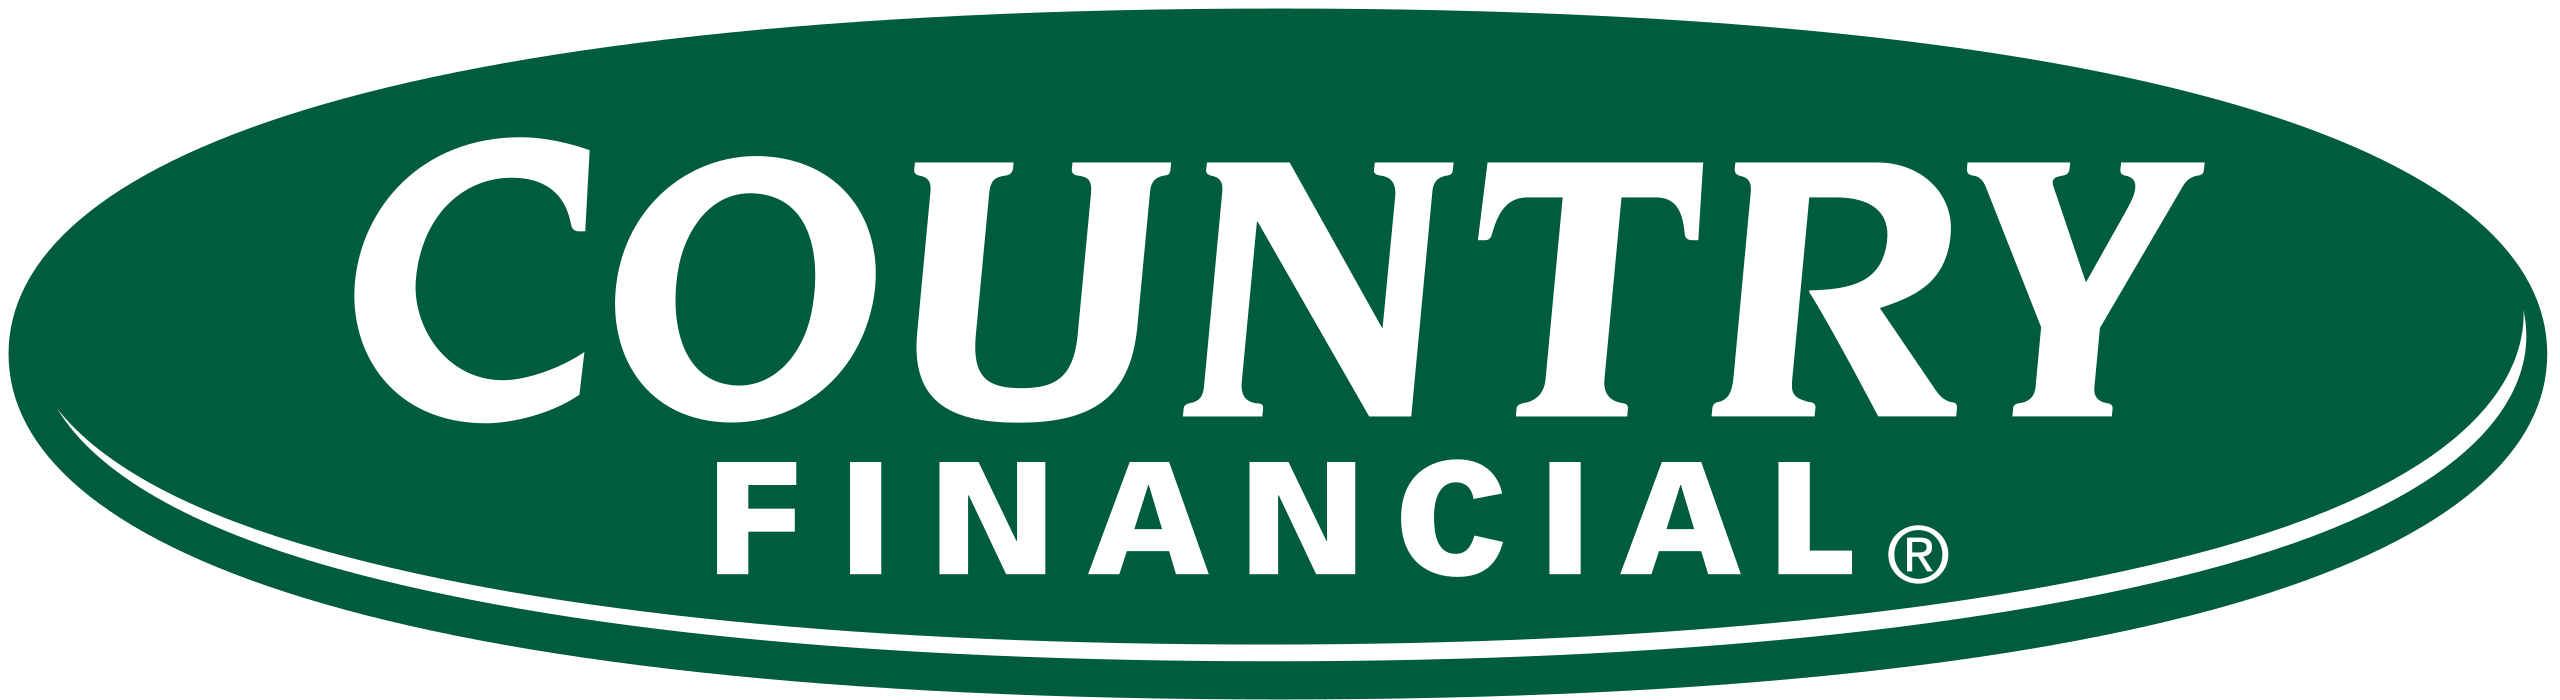 Country_Financial_logo.svg